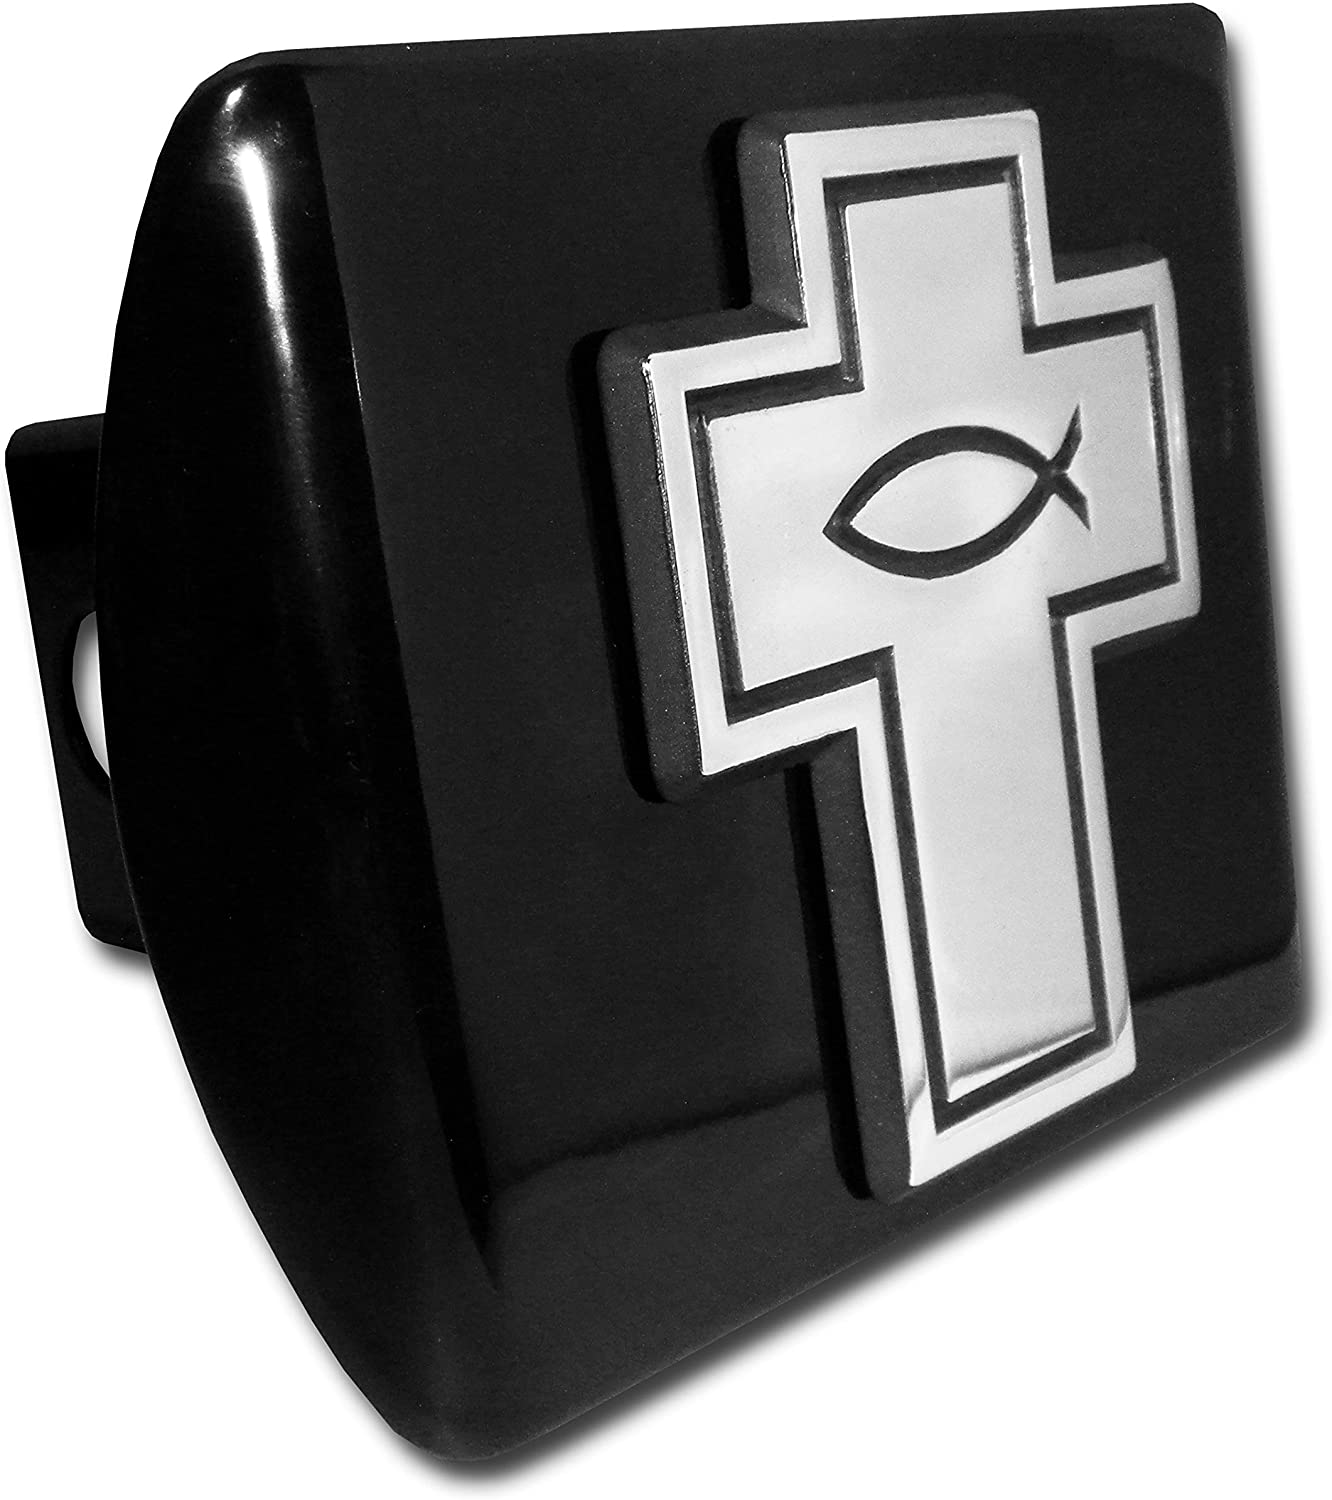 Elektroplate Cross with Christian Fish Lord God Jesus Christ Religion Ichthus Symbol Black with Chrome Cross Emblem Religous Metal Hitch Cover Fits 2 Inch Auto Car Truck Receiver